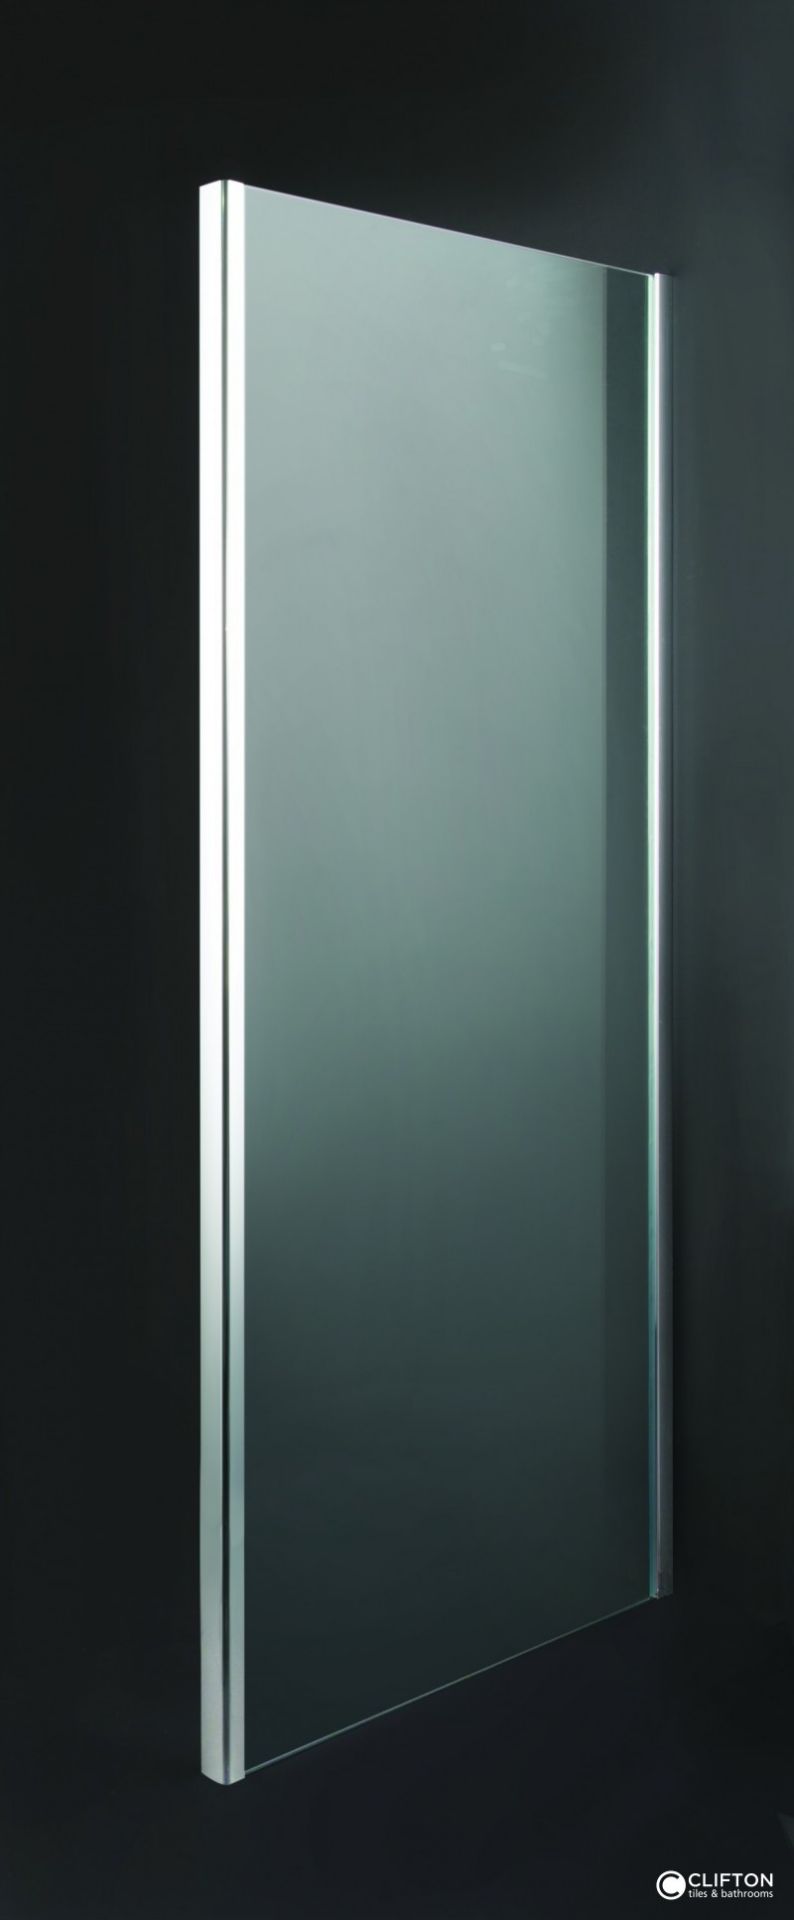 Luxury 8mm 700 side panel ENLSP7, New and boxed. RRP œ137.